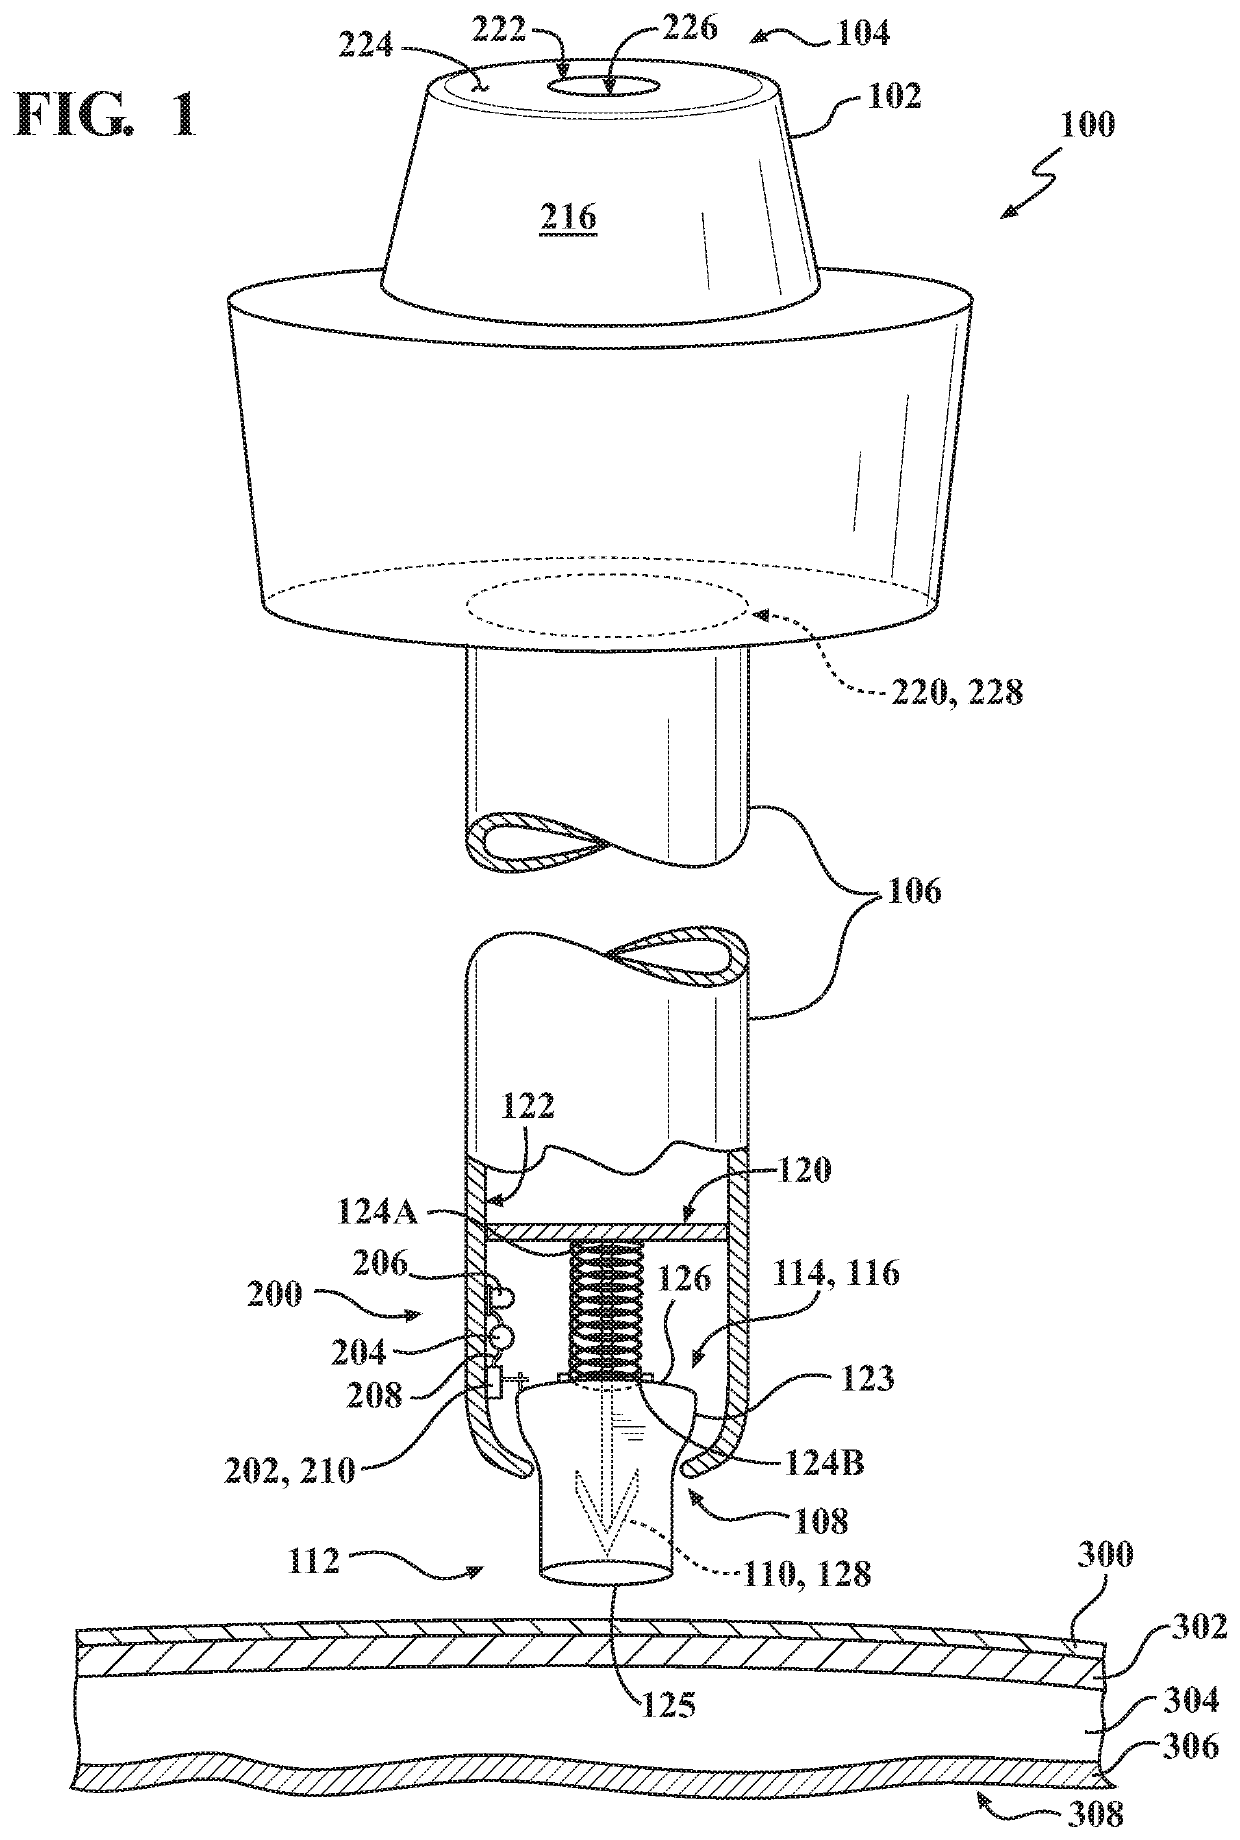 Trocar assemblies with movable atraumatic tip and methods for use